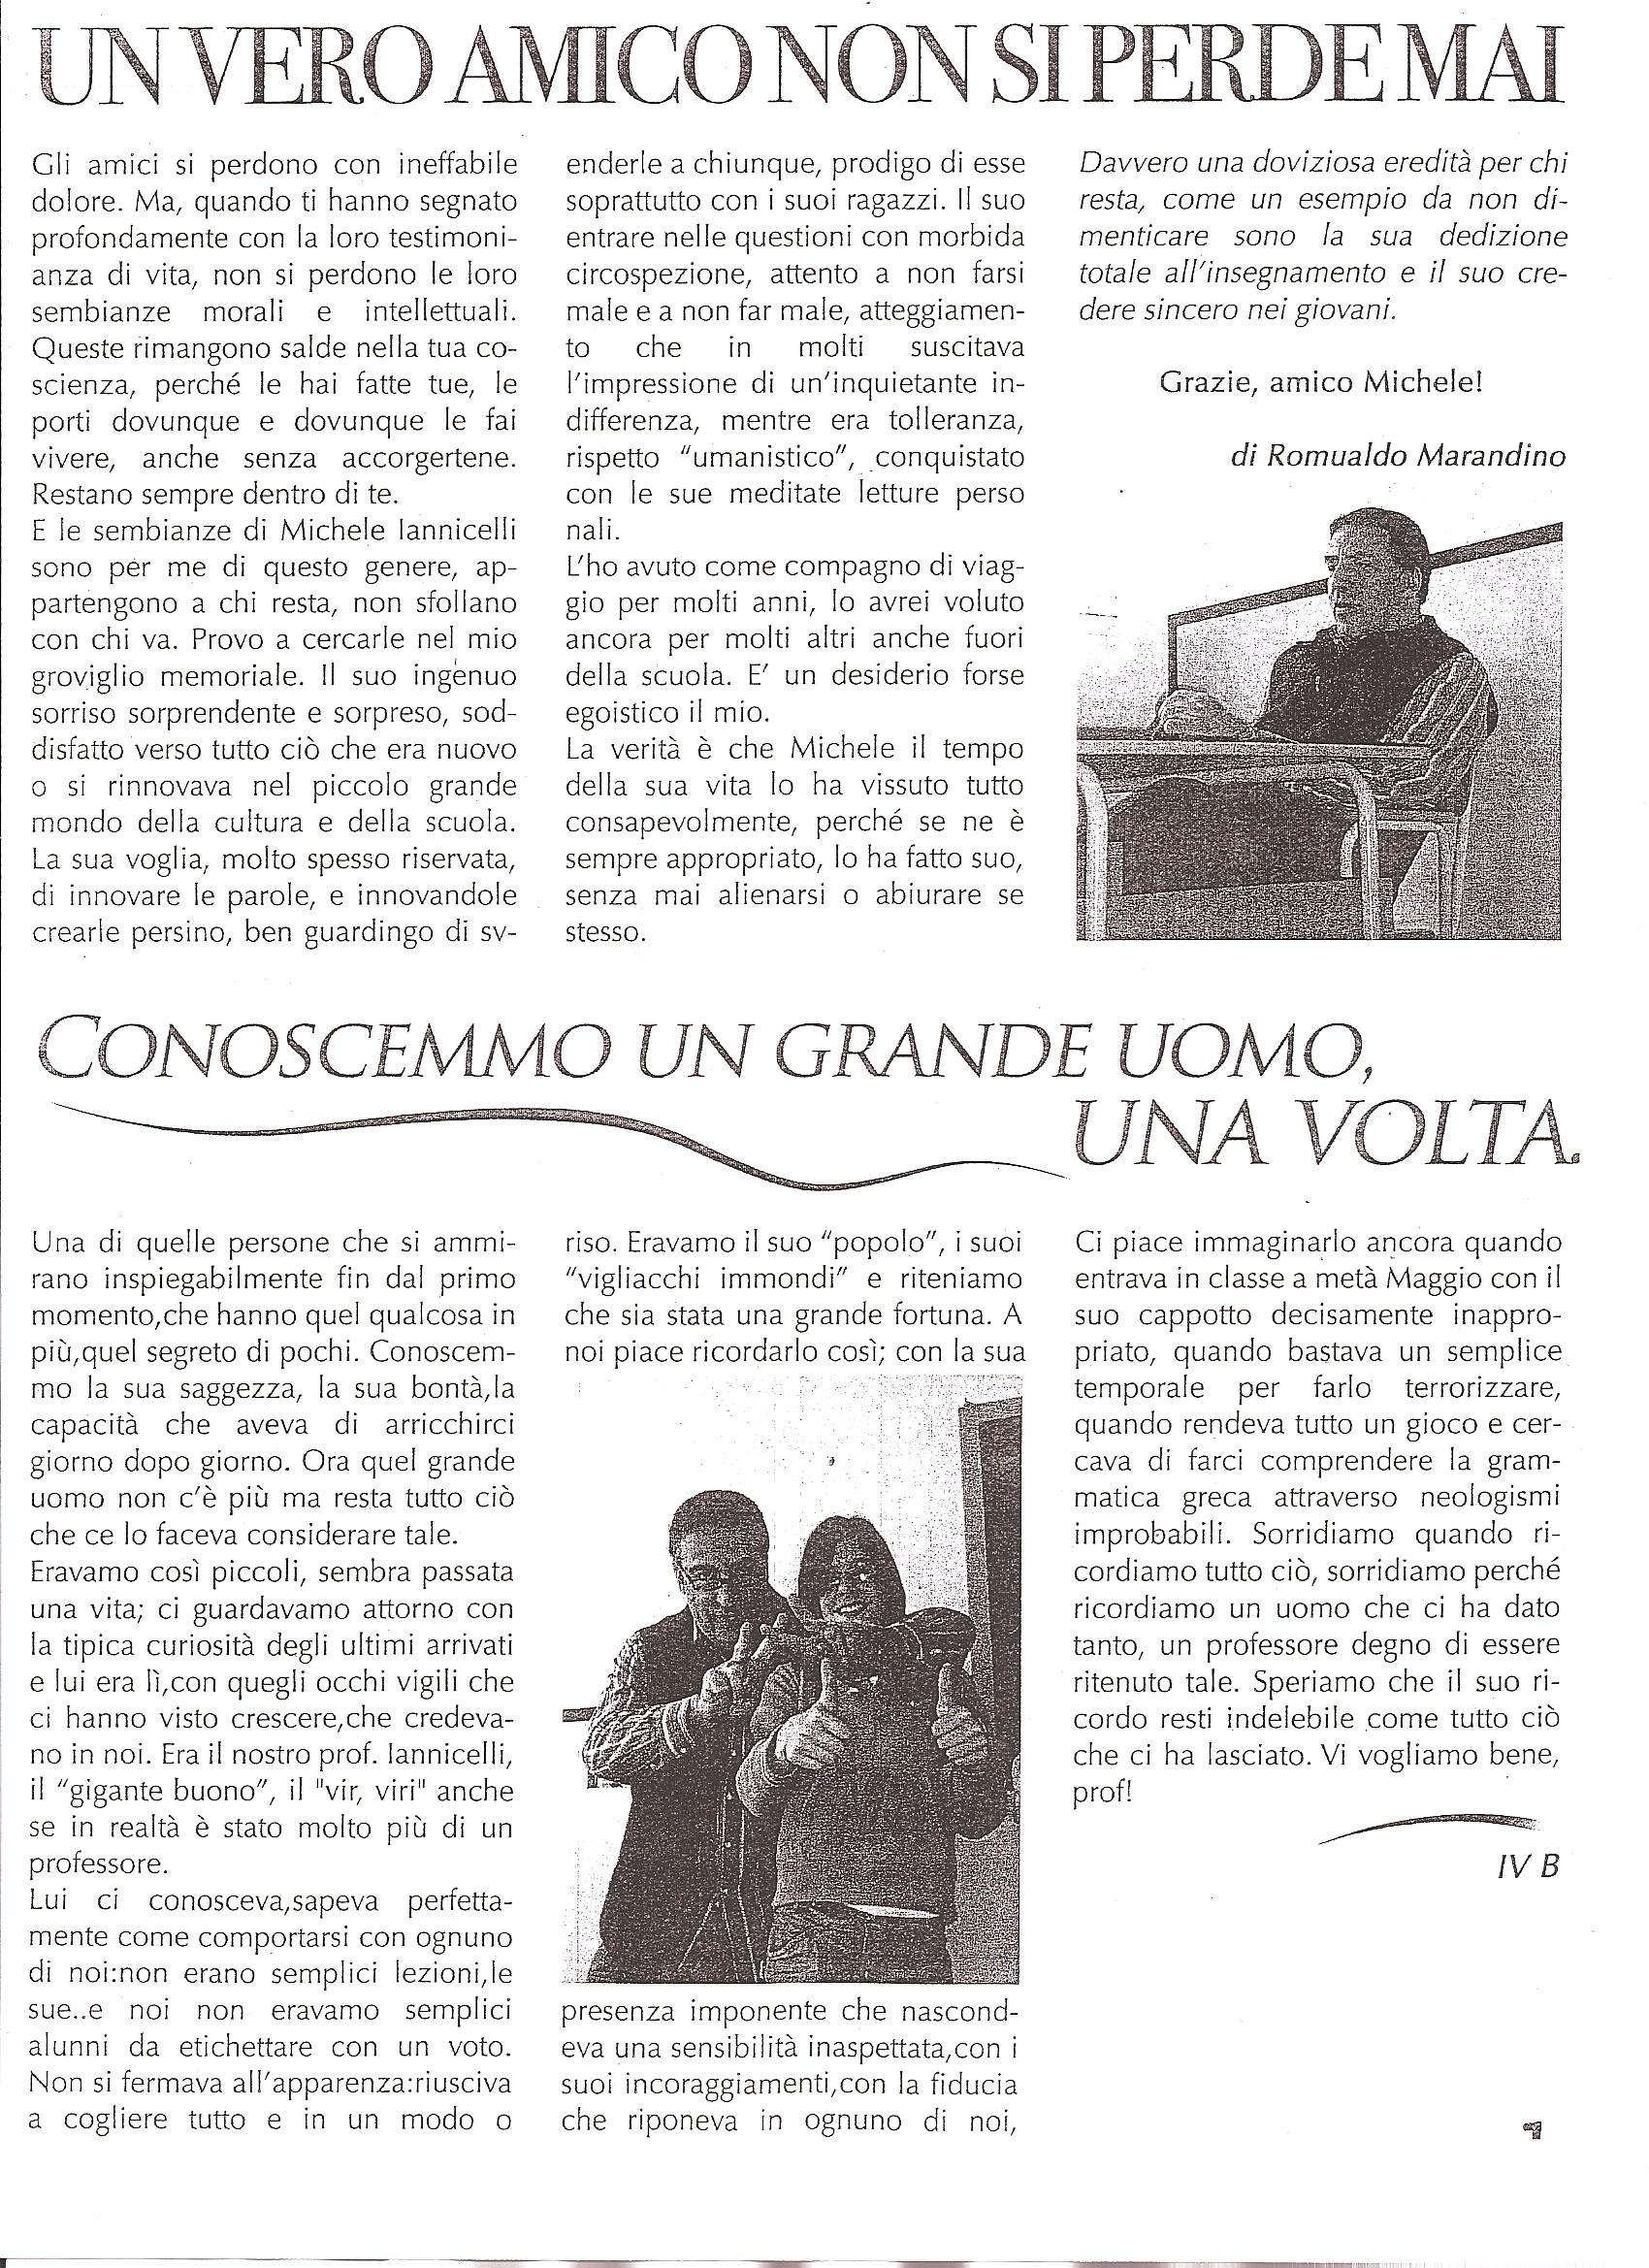 giornale 1